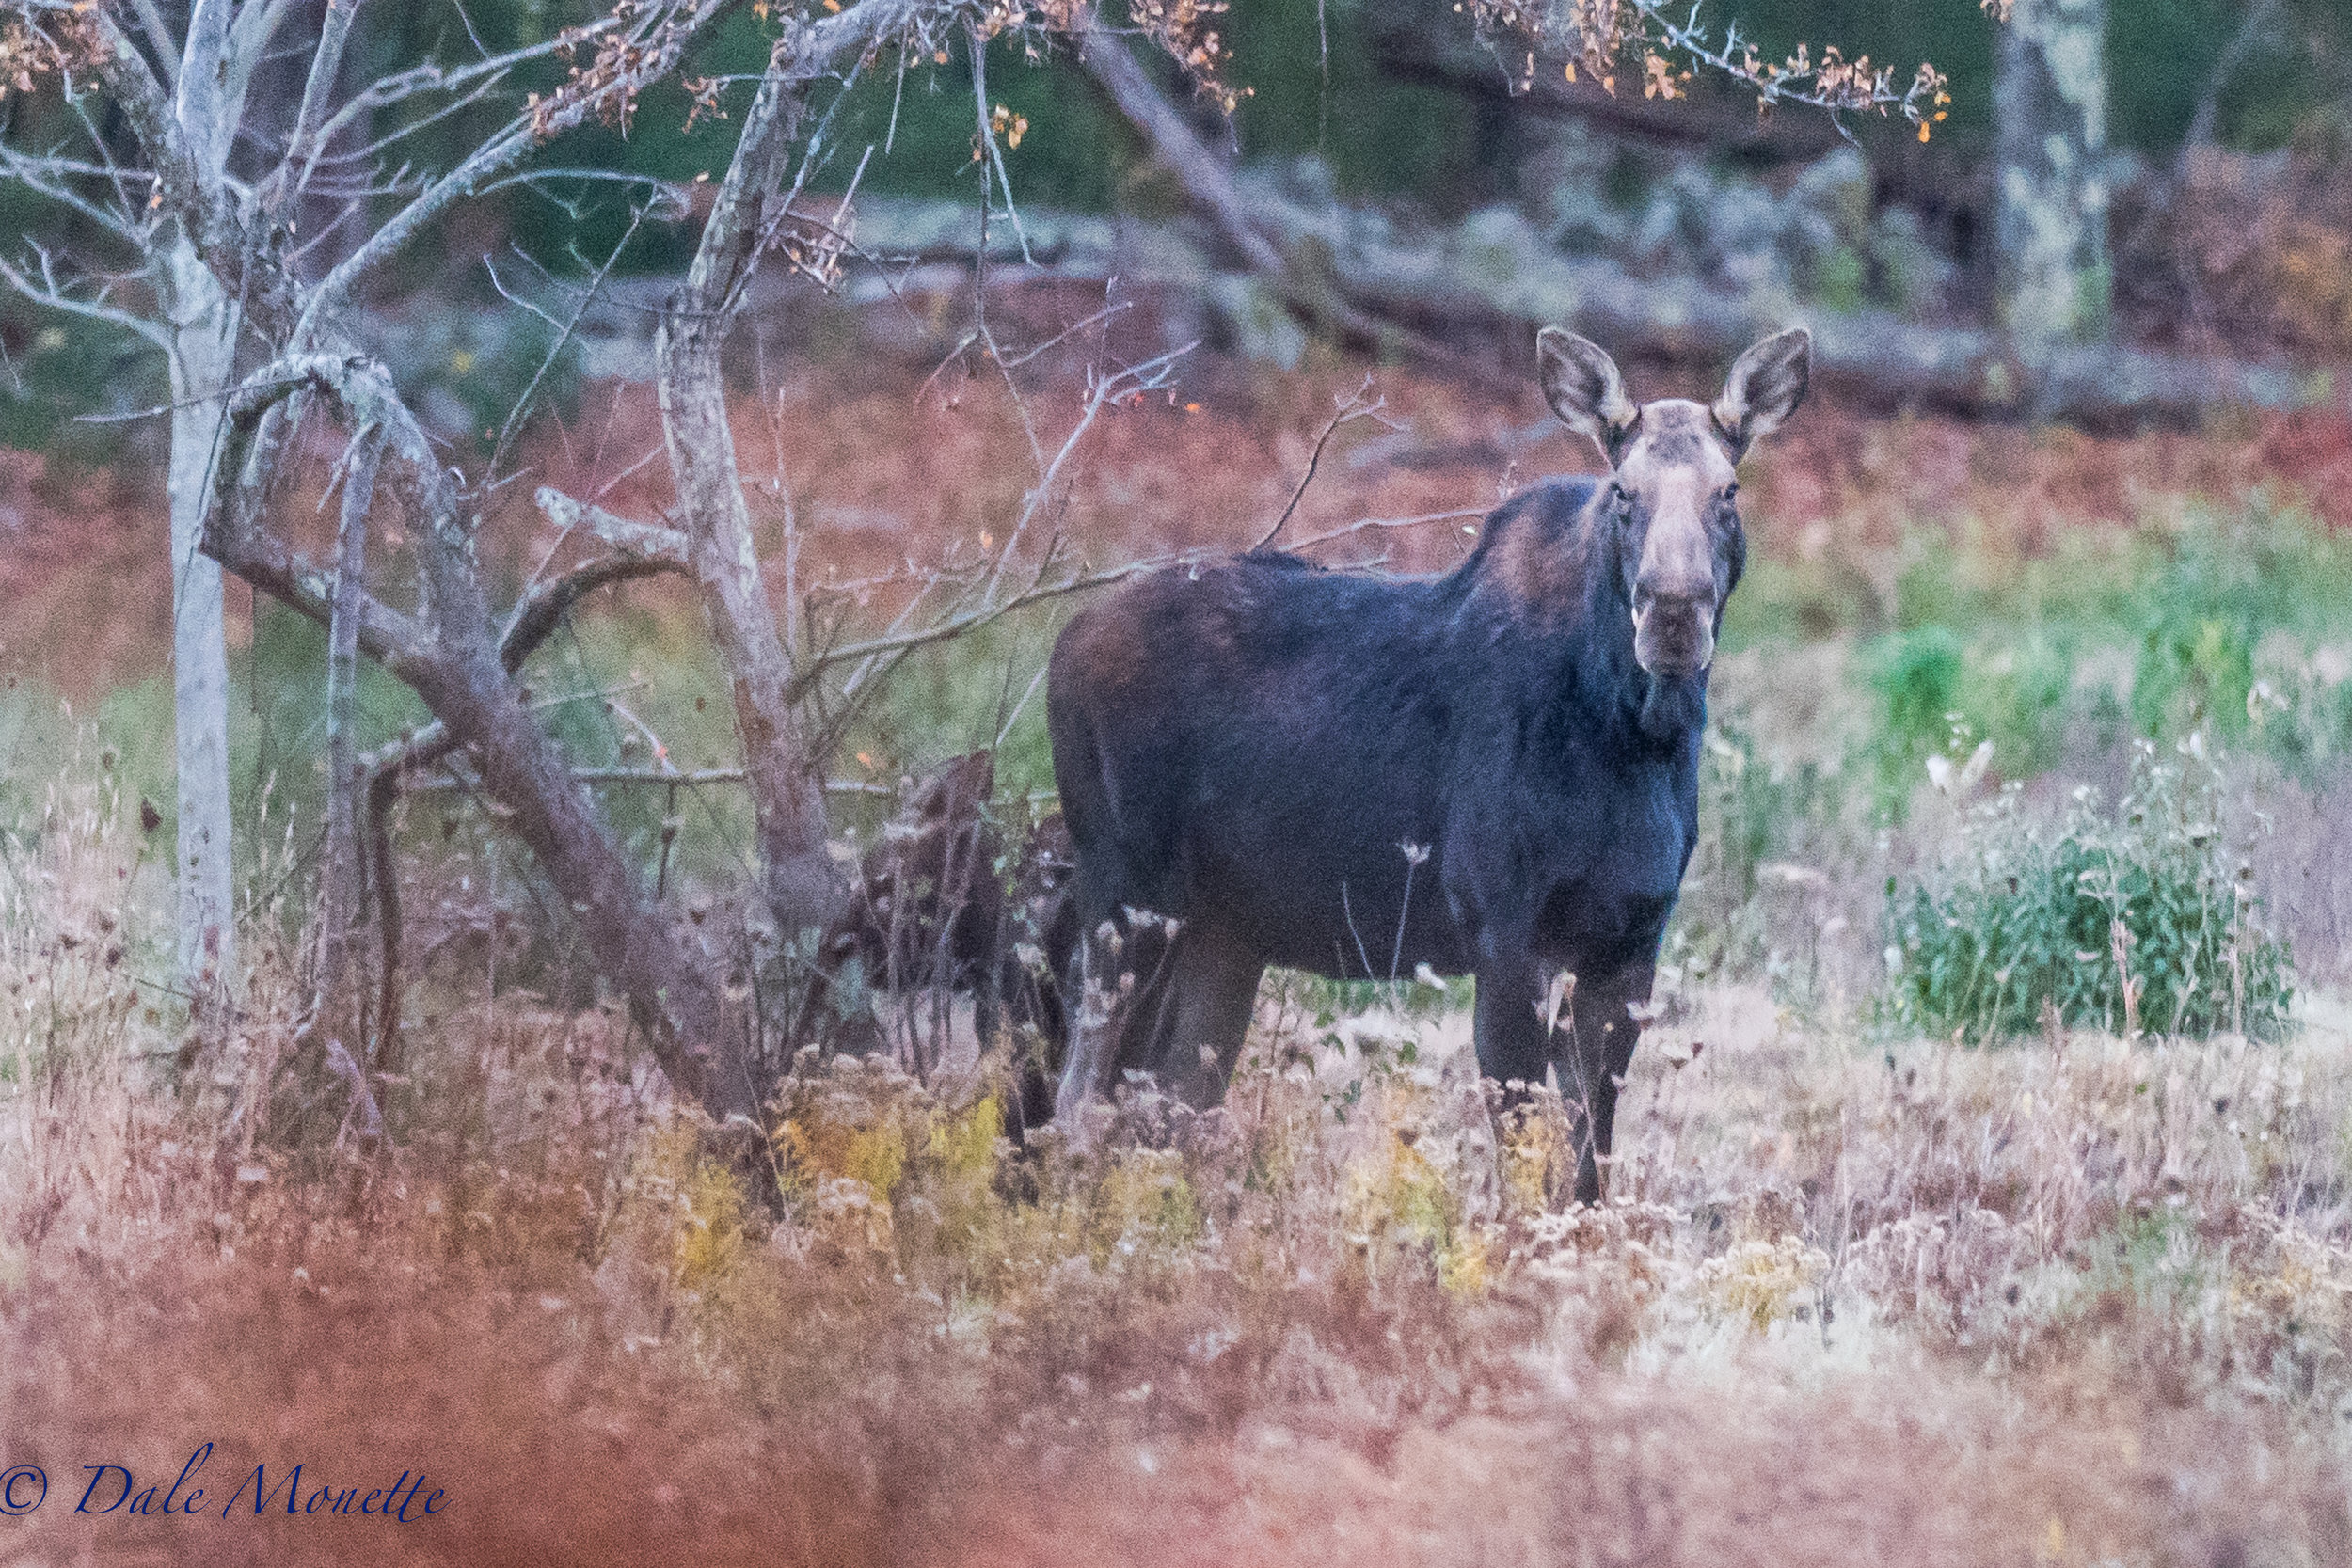   This morning I watched a female moose with a young in tow browse in an abandoned apple orchard at Quabbin. &nbsp;A great way to start off the week ! &nbsp;11/7/17  